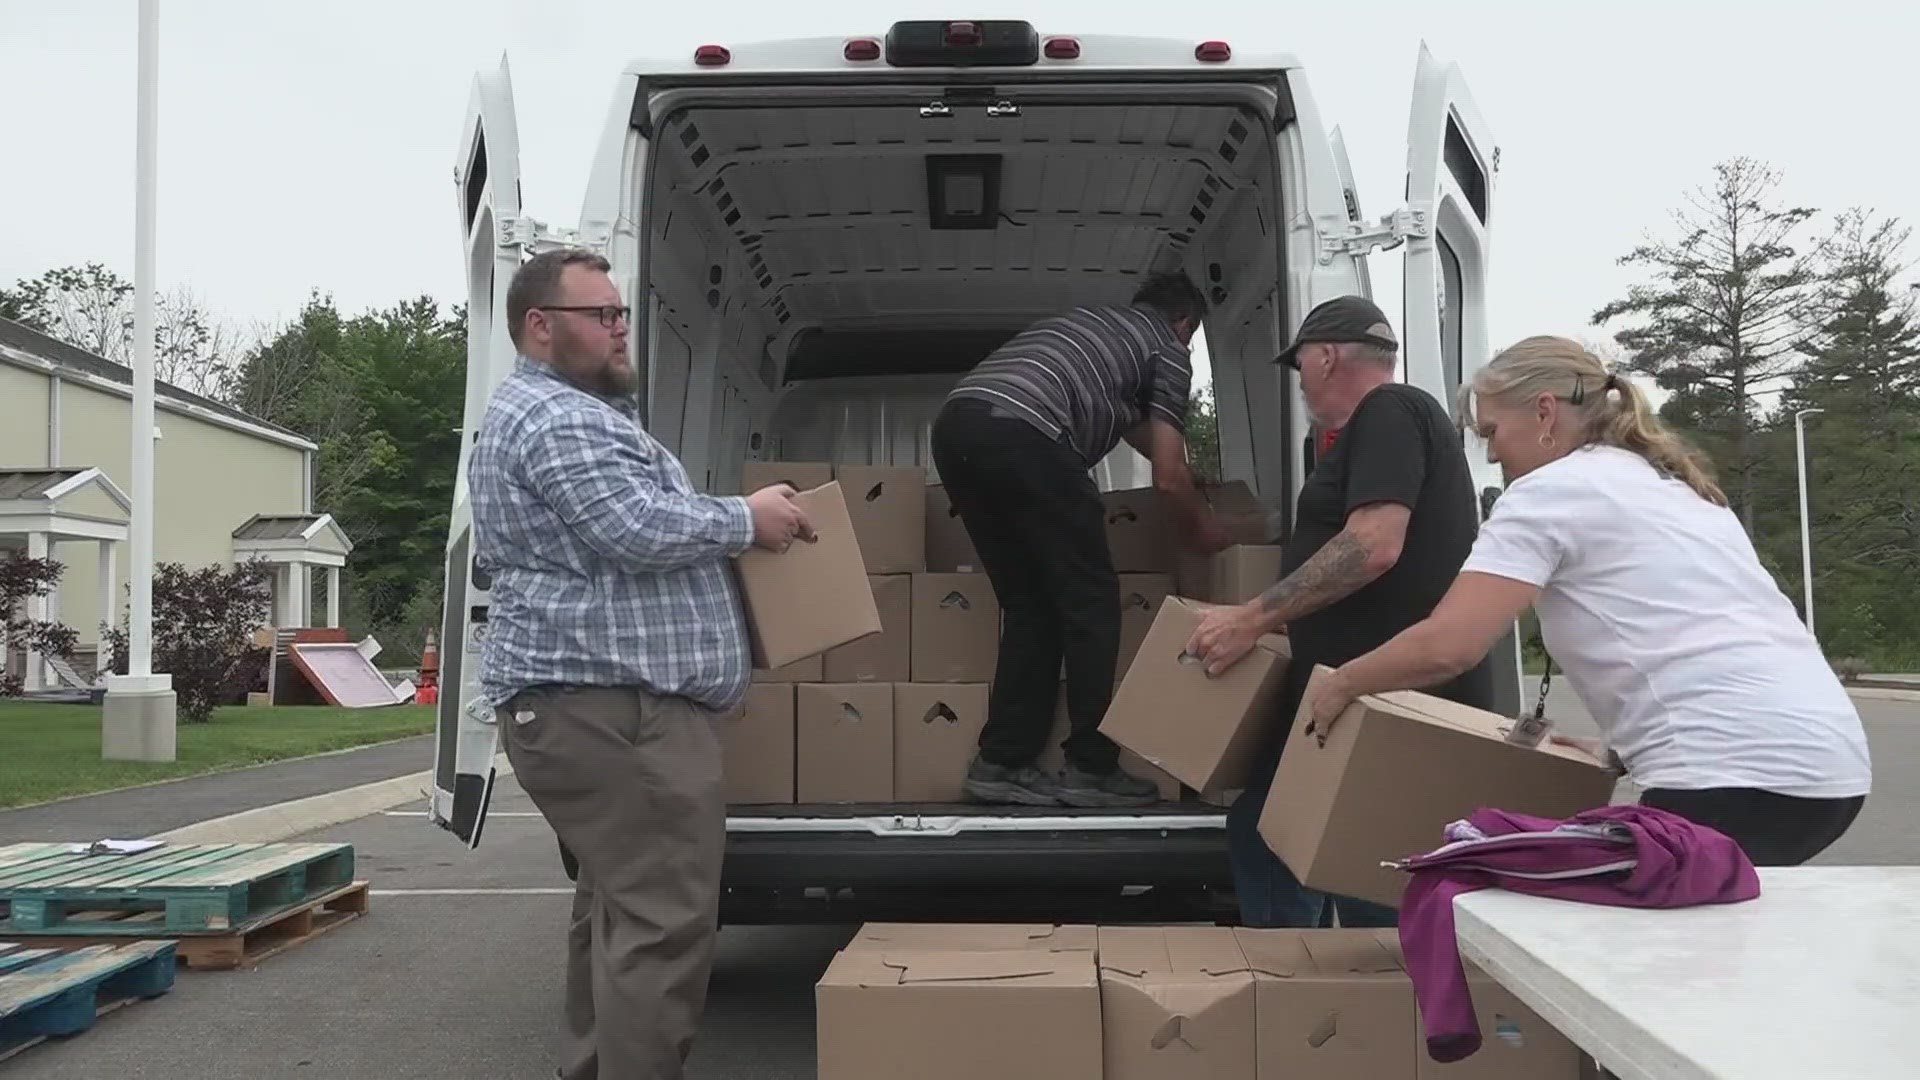 The U.S. Department of Agriculture, Conservation, and Forestry worked with local hunger-relief organizations to help distribute food boxes to those in need.